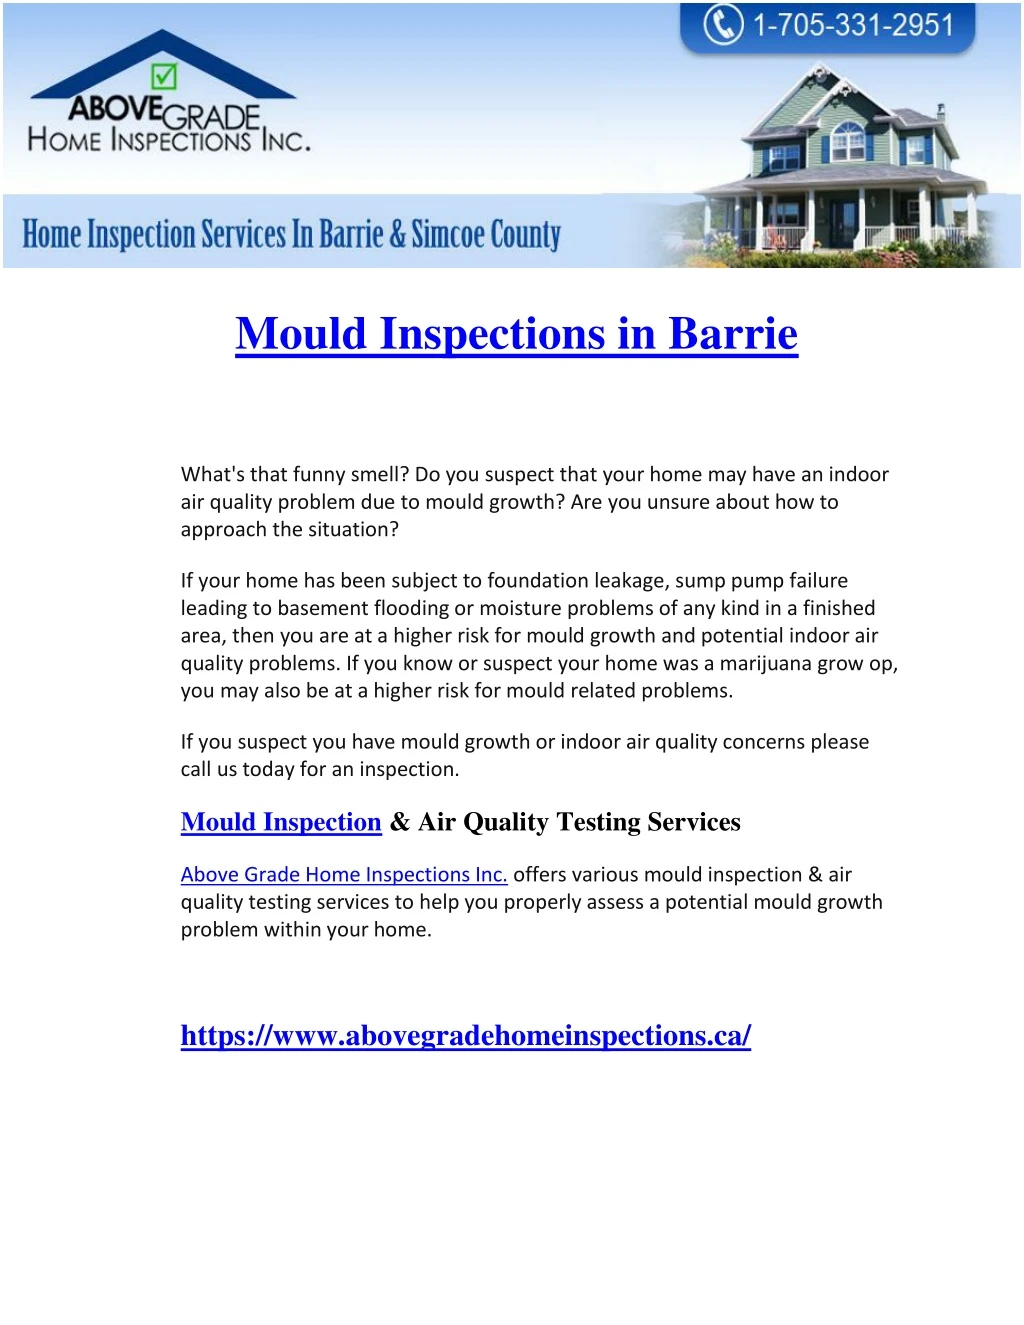 mould inspections in barrie